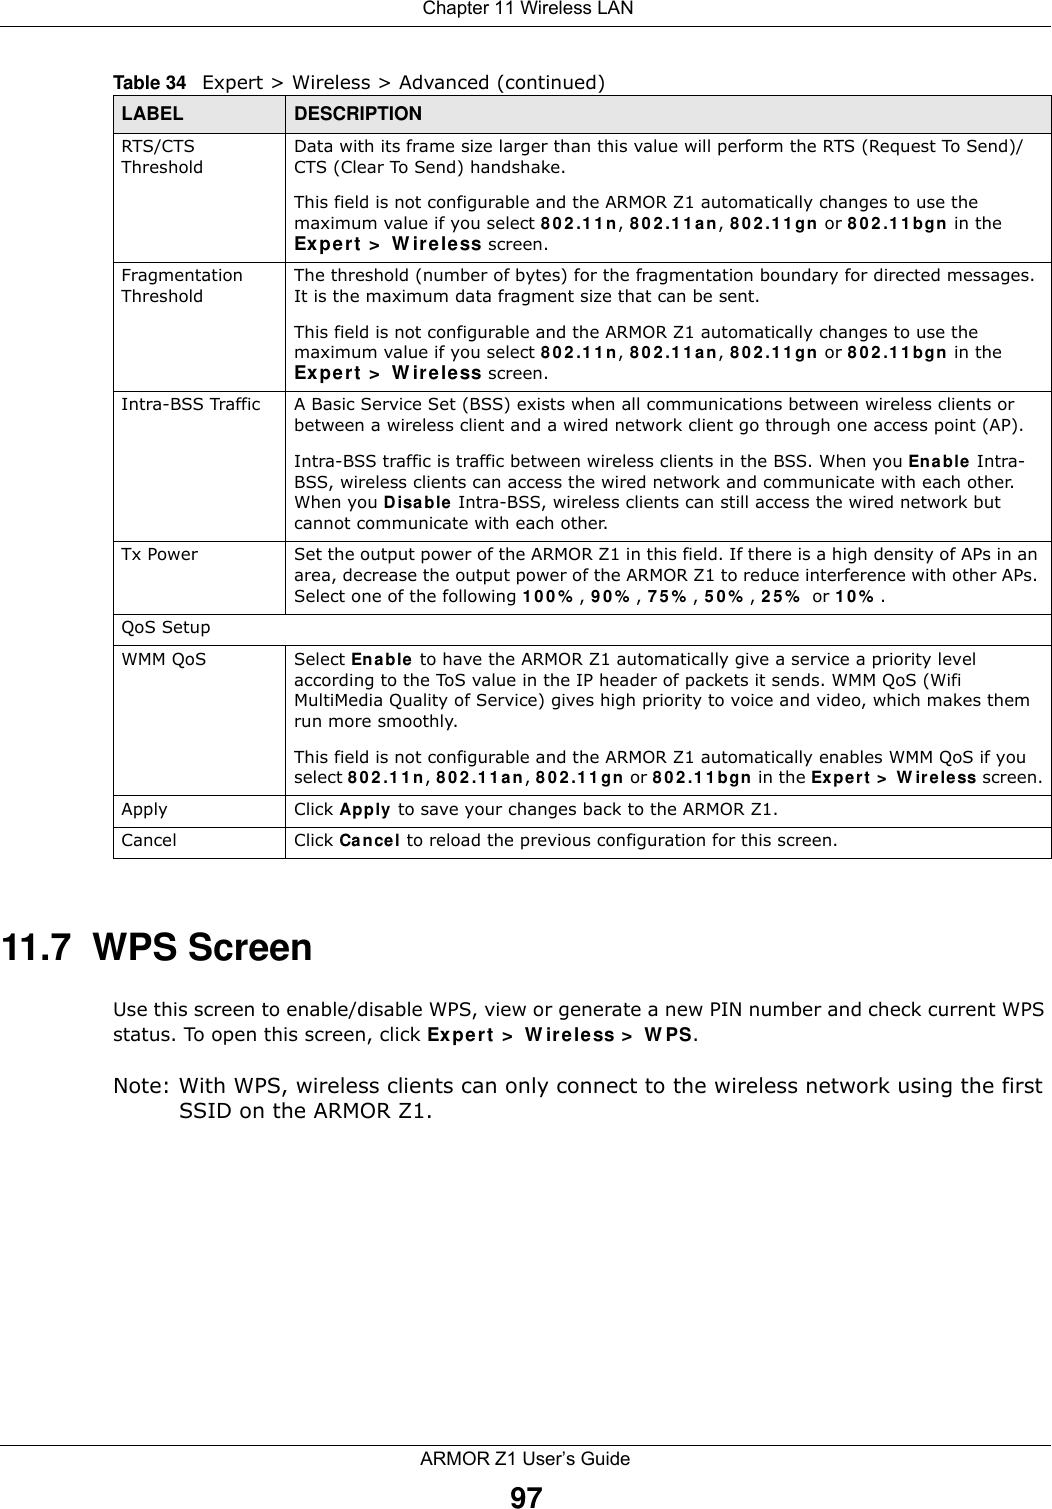  Chapter 11 Wireless LANARMOR Z1 User’s Guide9711.7  WPS ScreenUse this screen to enable/disable WPS, view or generate a new PIN number and check current WPS status. To open this screen, click Expert &gt; Wireless &gt; WPS.Note: With WPS, wireless clients can only connect to the wireless network using the first SSID on the ARMOR Z1.RTS/CTS ThresholdData with its frame size larger than this value will perform the RTS (Request To Send)/CTS (Clear To Send) handshake. This field is not configurable and the ARMOR Z1 automatically changes to use the maximum value if you select 802.11n, 802.11an, 802.11gn or 802.11bgn in the Expert &gt; Wireless screen.Fragmentation ThresholdThe threshold (number of bytes) for the fragmentation boundary for directed messages. It is the maximum data fragment size that can be sent. This field is not configurable and the ARMOR Z1 automatically changes to use the maximum value if you select 802.11n, 802.11an, 802.11gn or 802.11bgn in the Expert &gt; Wireless screen.Intra-BSS Traffic A Basic Service Set (BSS) exists when all communications between wireless clients or between a wireless client and a wired network client go through one access point (AP). Intra-BSS traffic is traffic between wireless clients in the BSS. When you Enable Intra-BSS, wireless clients can access the wired network and communicate with each other. When you Disable Intra-BSS, wireless clients can still access the wired network but cannot communicate with each other.Tx Power Set the output power of the ARMOR Z1 in this field. If there is a high density of APs in an area, decrease the output power of the ARMOR Z1 to reduce interference with other APs. Select one of the following 100%, 90%, 75%, 50%, 25% or 10%. QoS SetupWMM QoS Select Enable to have the ARMOR Z1 automatically give a service a priority level according to the ToS value in the IP header of packets it sends. WMM QoS (Wifi MultiMedia Quality of Service) gives high priority to voice and video, which makes them run more smoothly.This field is not configurable and the ARMOR Z1 automatically enables WMM QoS if you select 802.11n, 802.11an, 802.11gn or 802.11bgn in the Expert &gt; Wireless screen.Apply Click Apply to save your changes back to the ARMOR Z1.Cancel Click Cancel to reload the previous configuration for this screen.Table 34   Expert &gt; Wireless &gt; Advanced (continued)LABEL DESCRIPTION